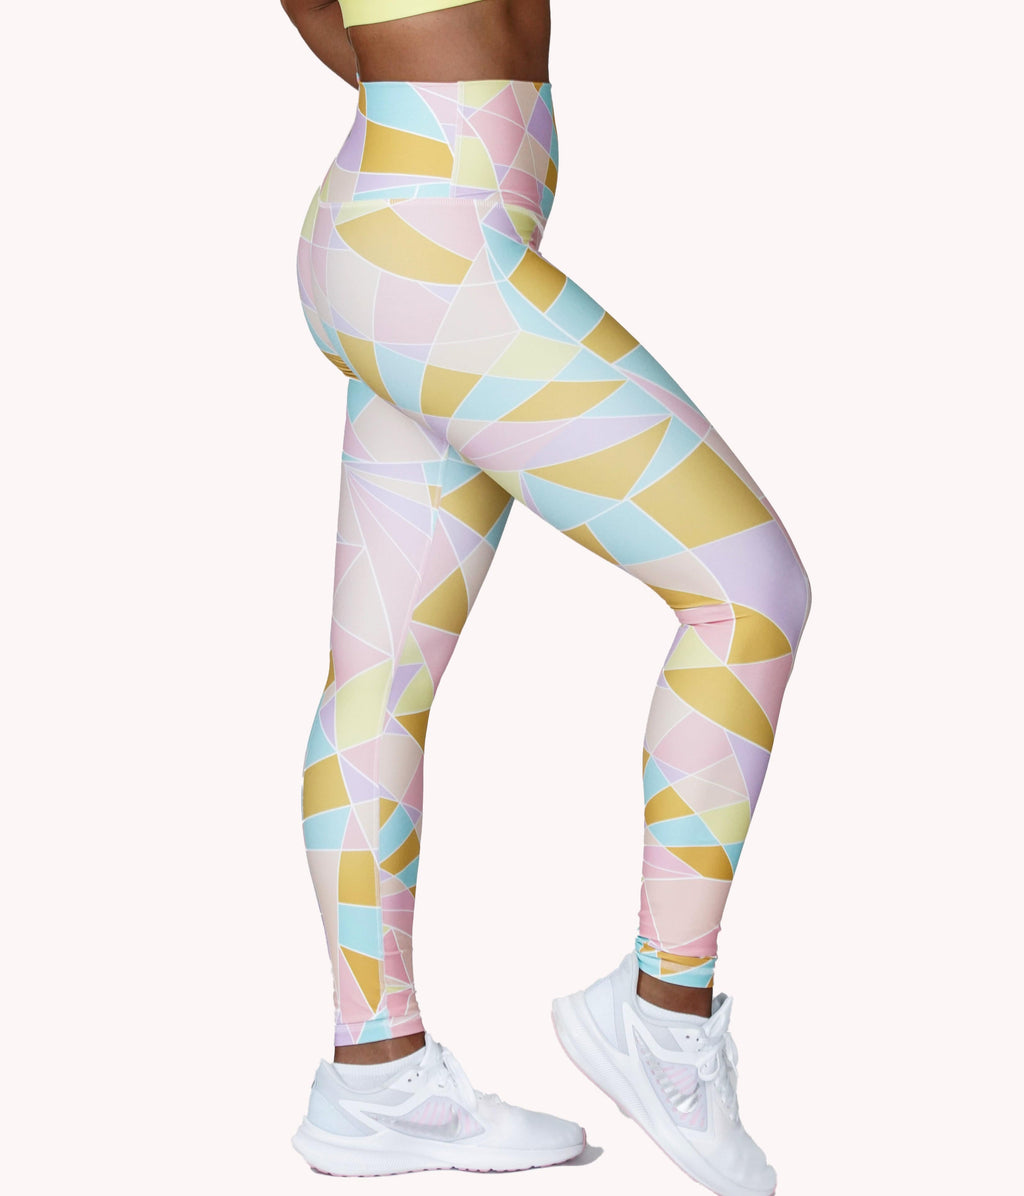 Women's Athletic Leggings Featuring Marble Print Accents. (6 Pack